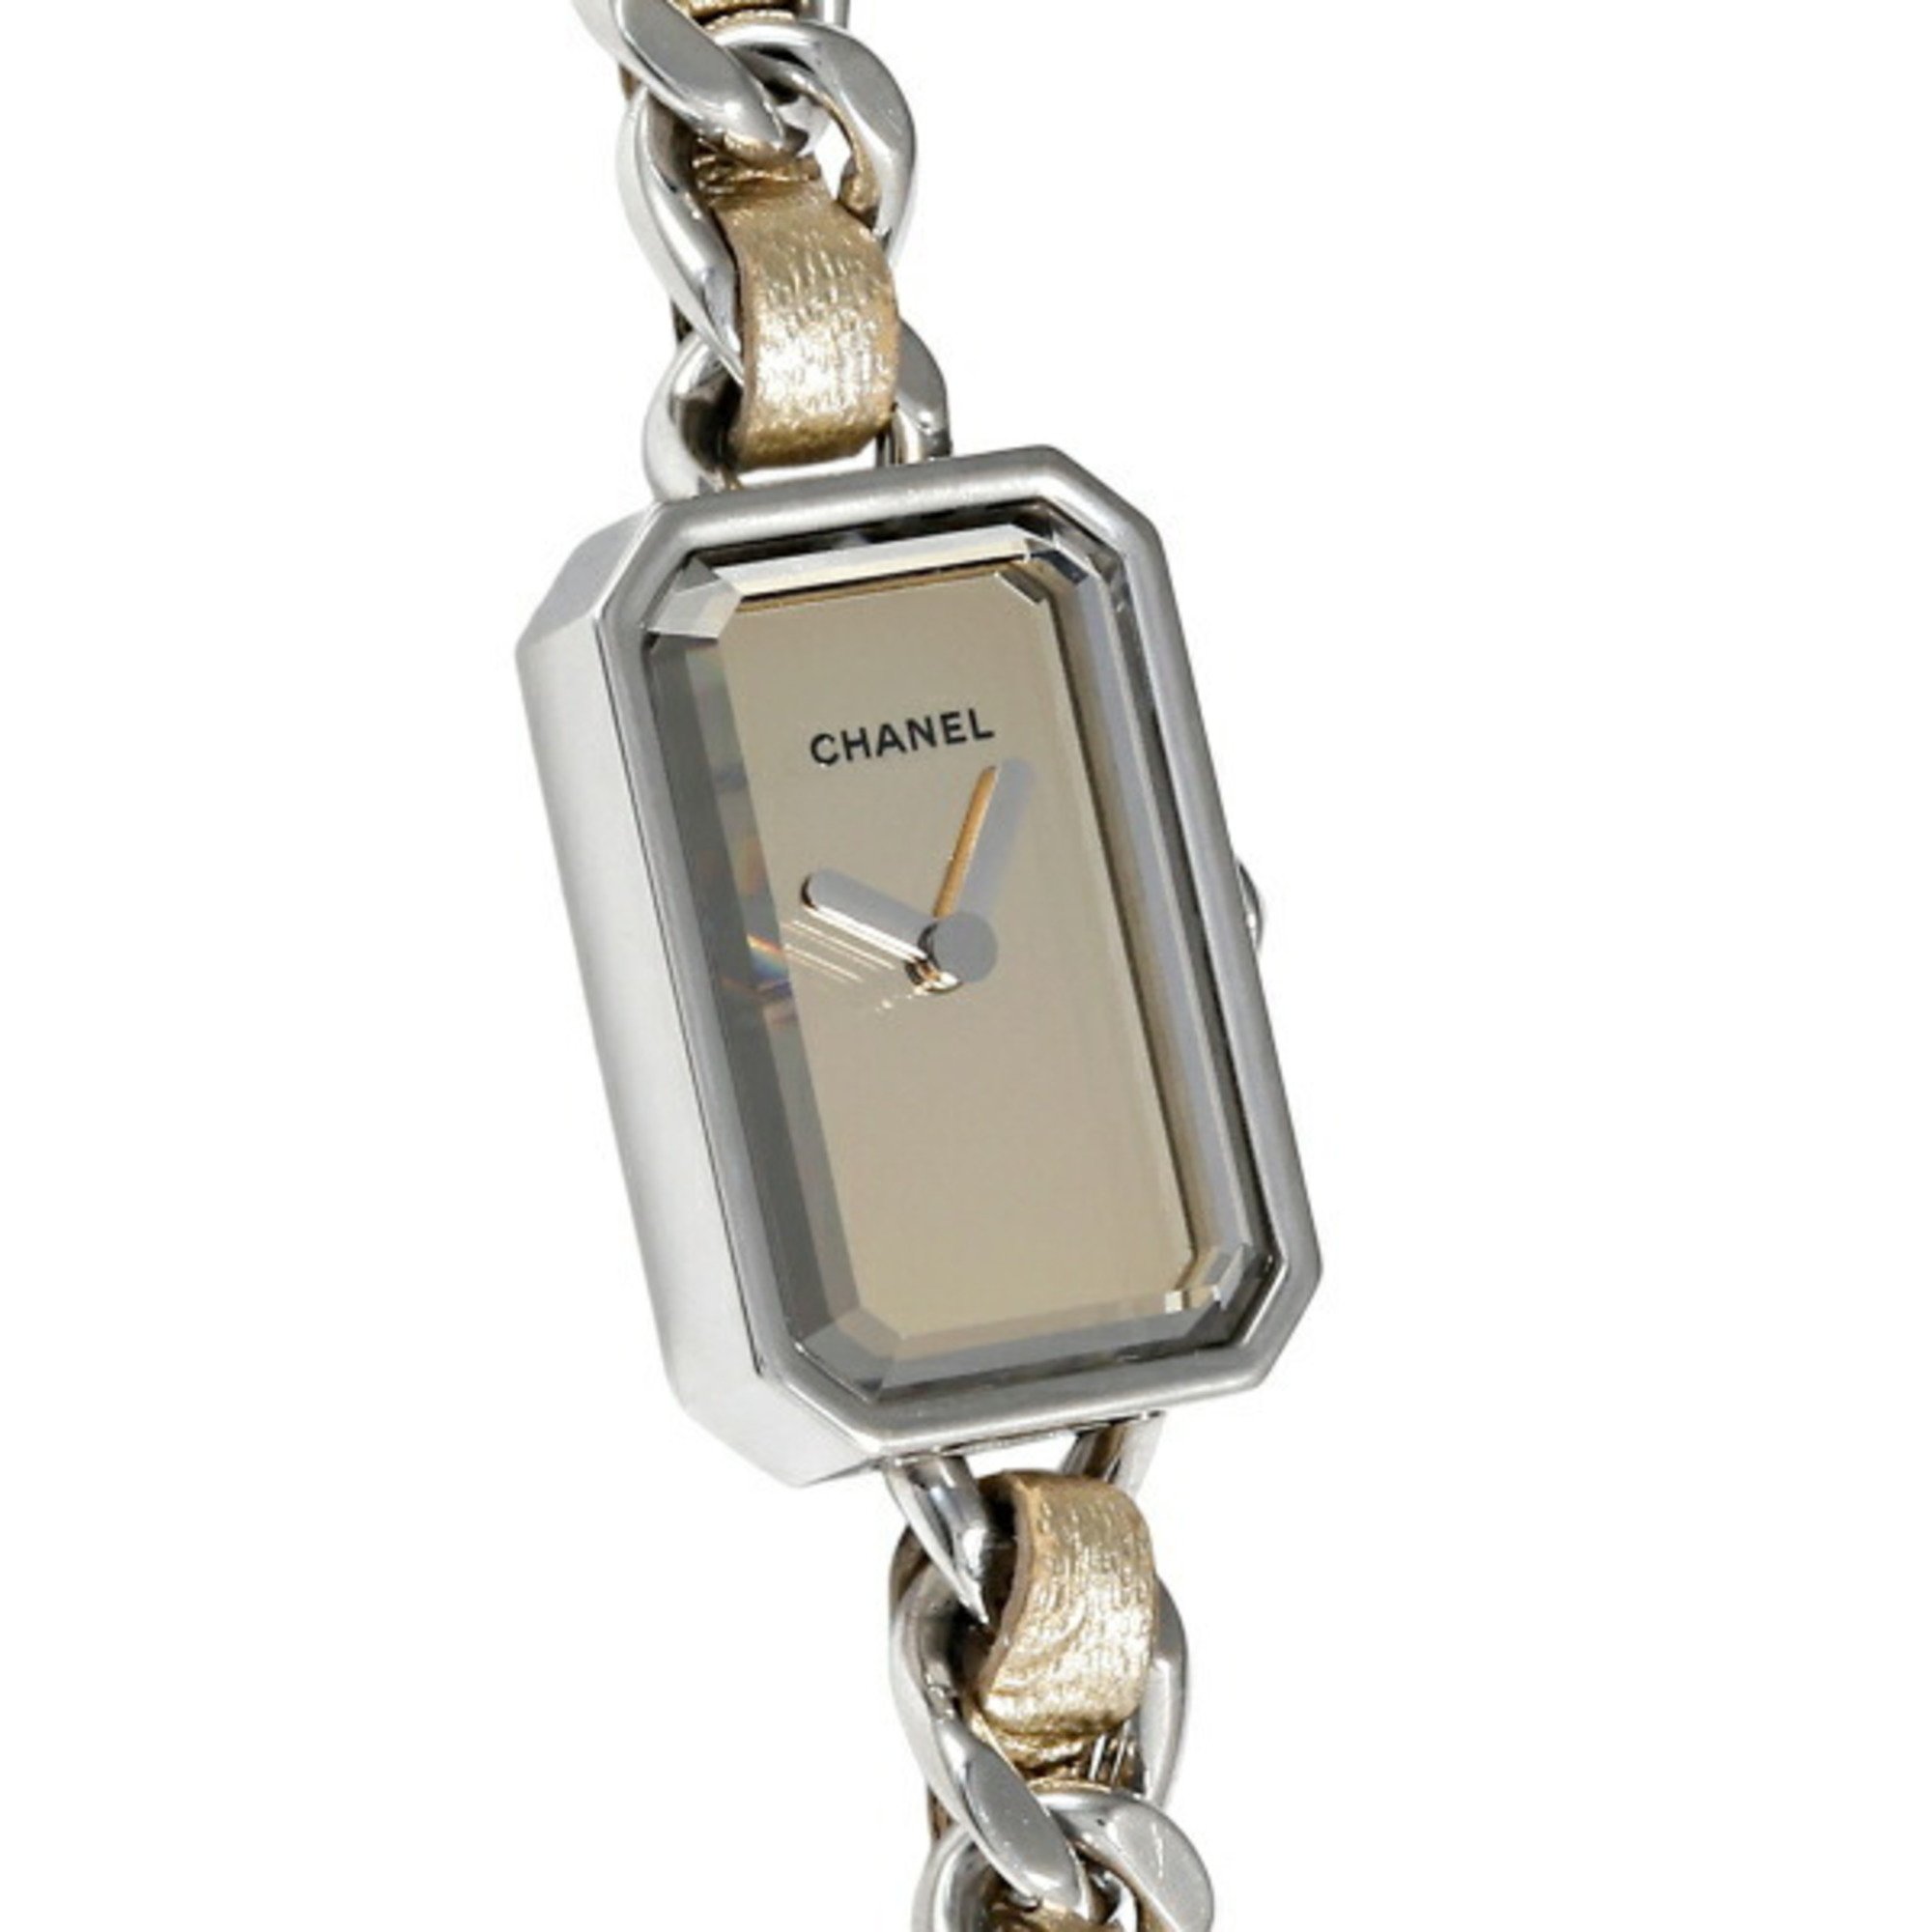 CHANEL Premiere Rock Limited to 1000 pieces worldwide H5583 Mirror dial watch for women